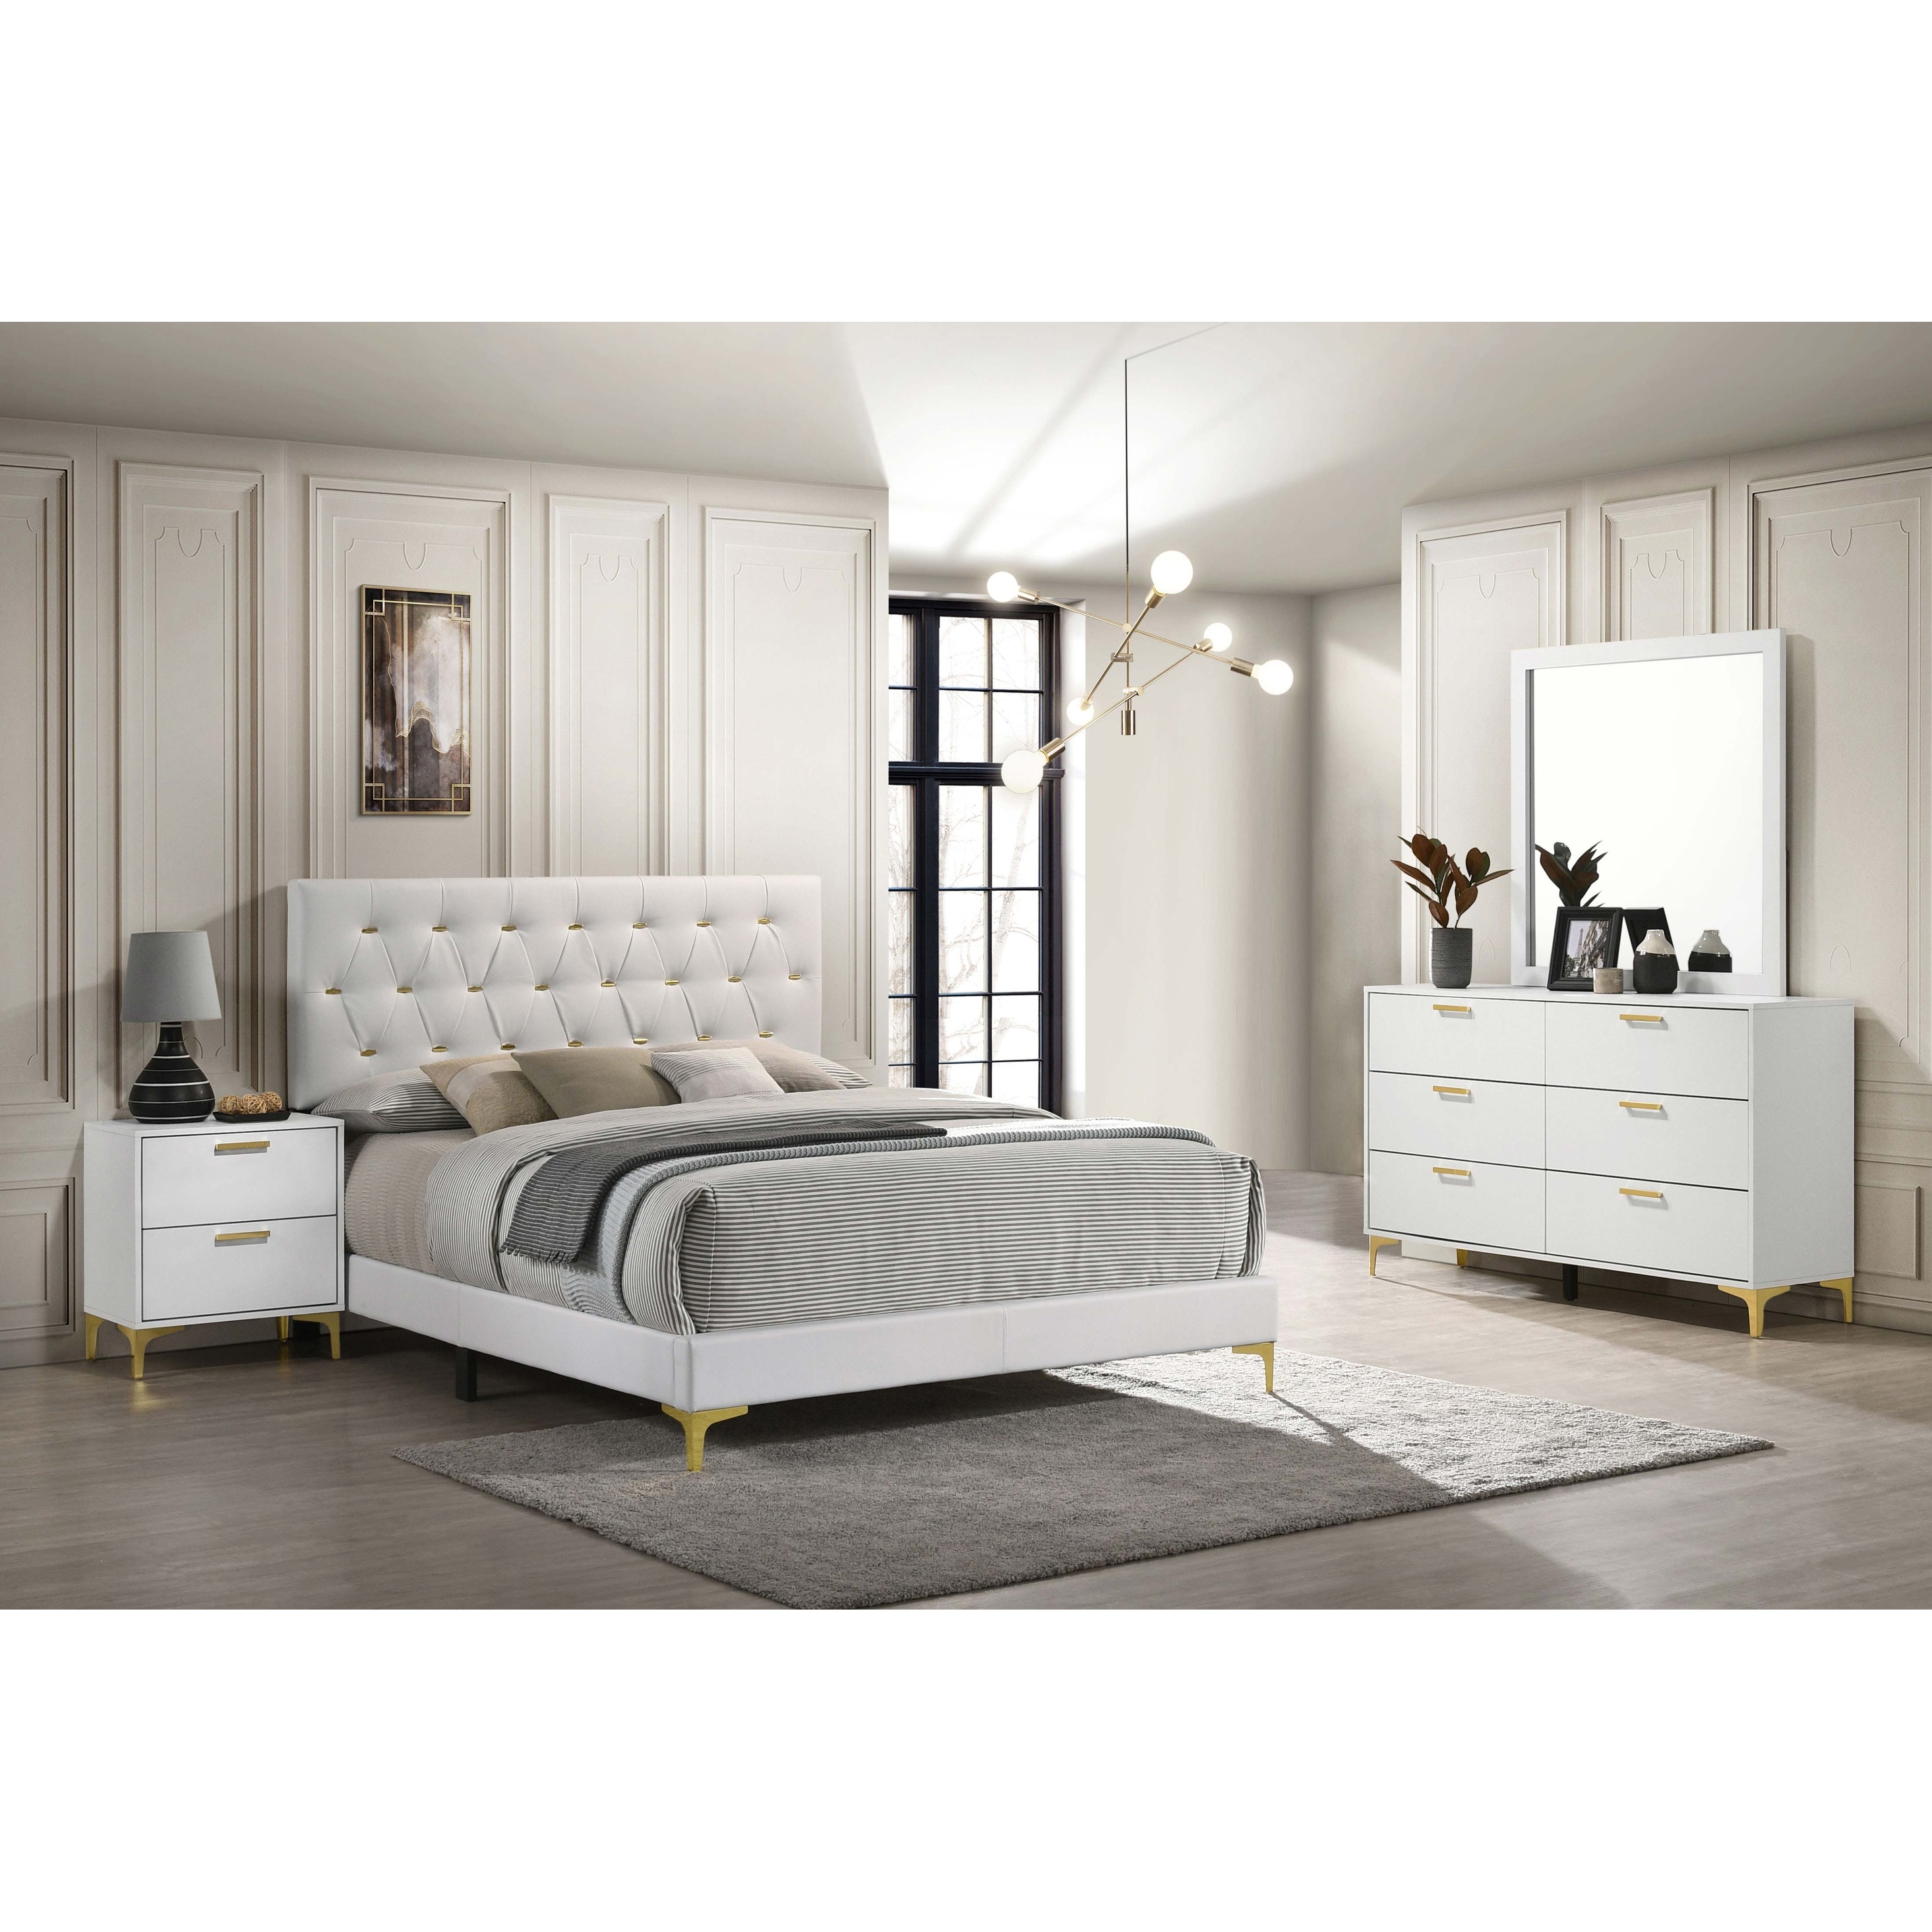 https://ak1.ostkcdn.com/images/products/is/images/direct/e02b5571d71144bf9d05b1267b7f12bd1686f1a9/Coaster-Furniture-Kendall-4-piece-Bedroom-Set-White-And-Black-Gold.jpg